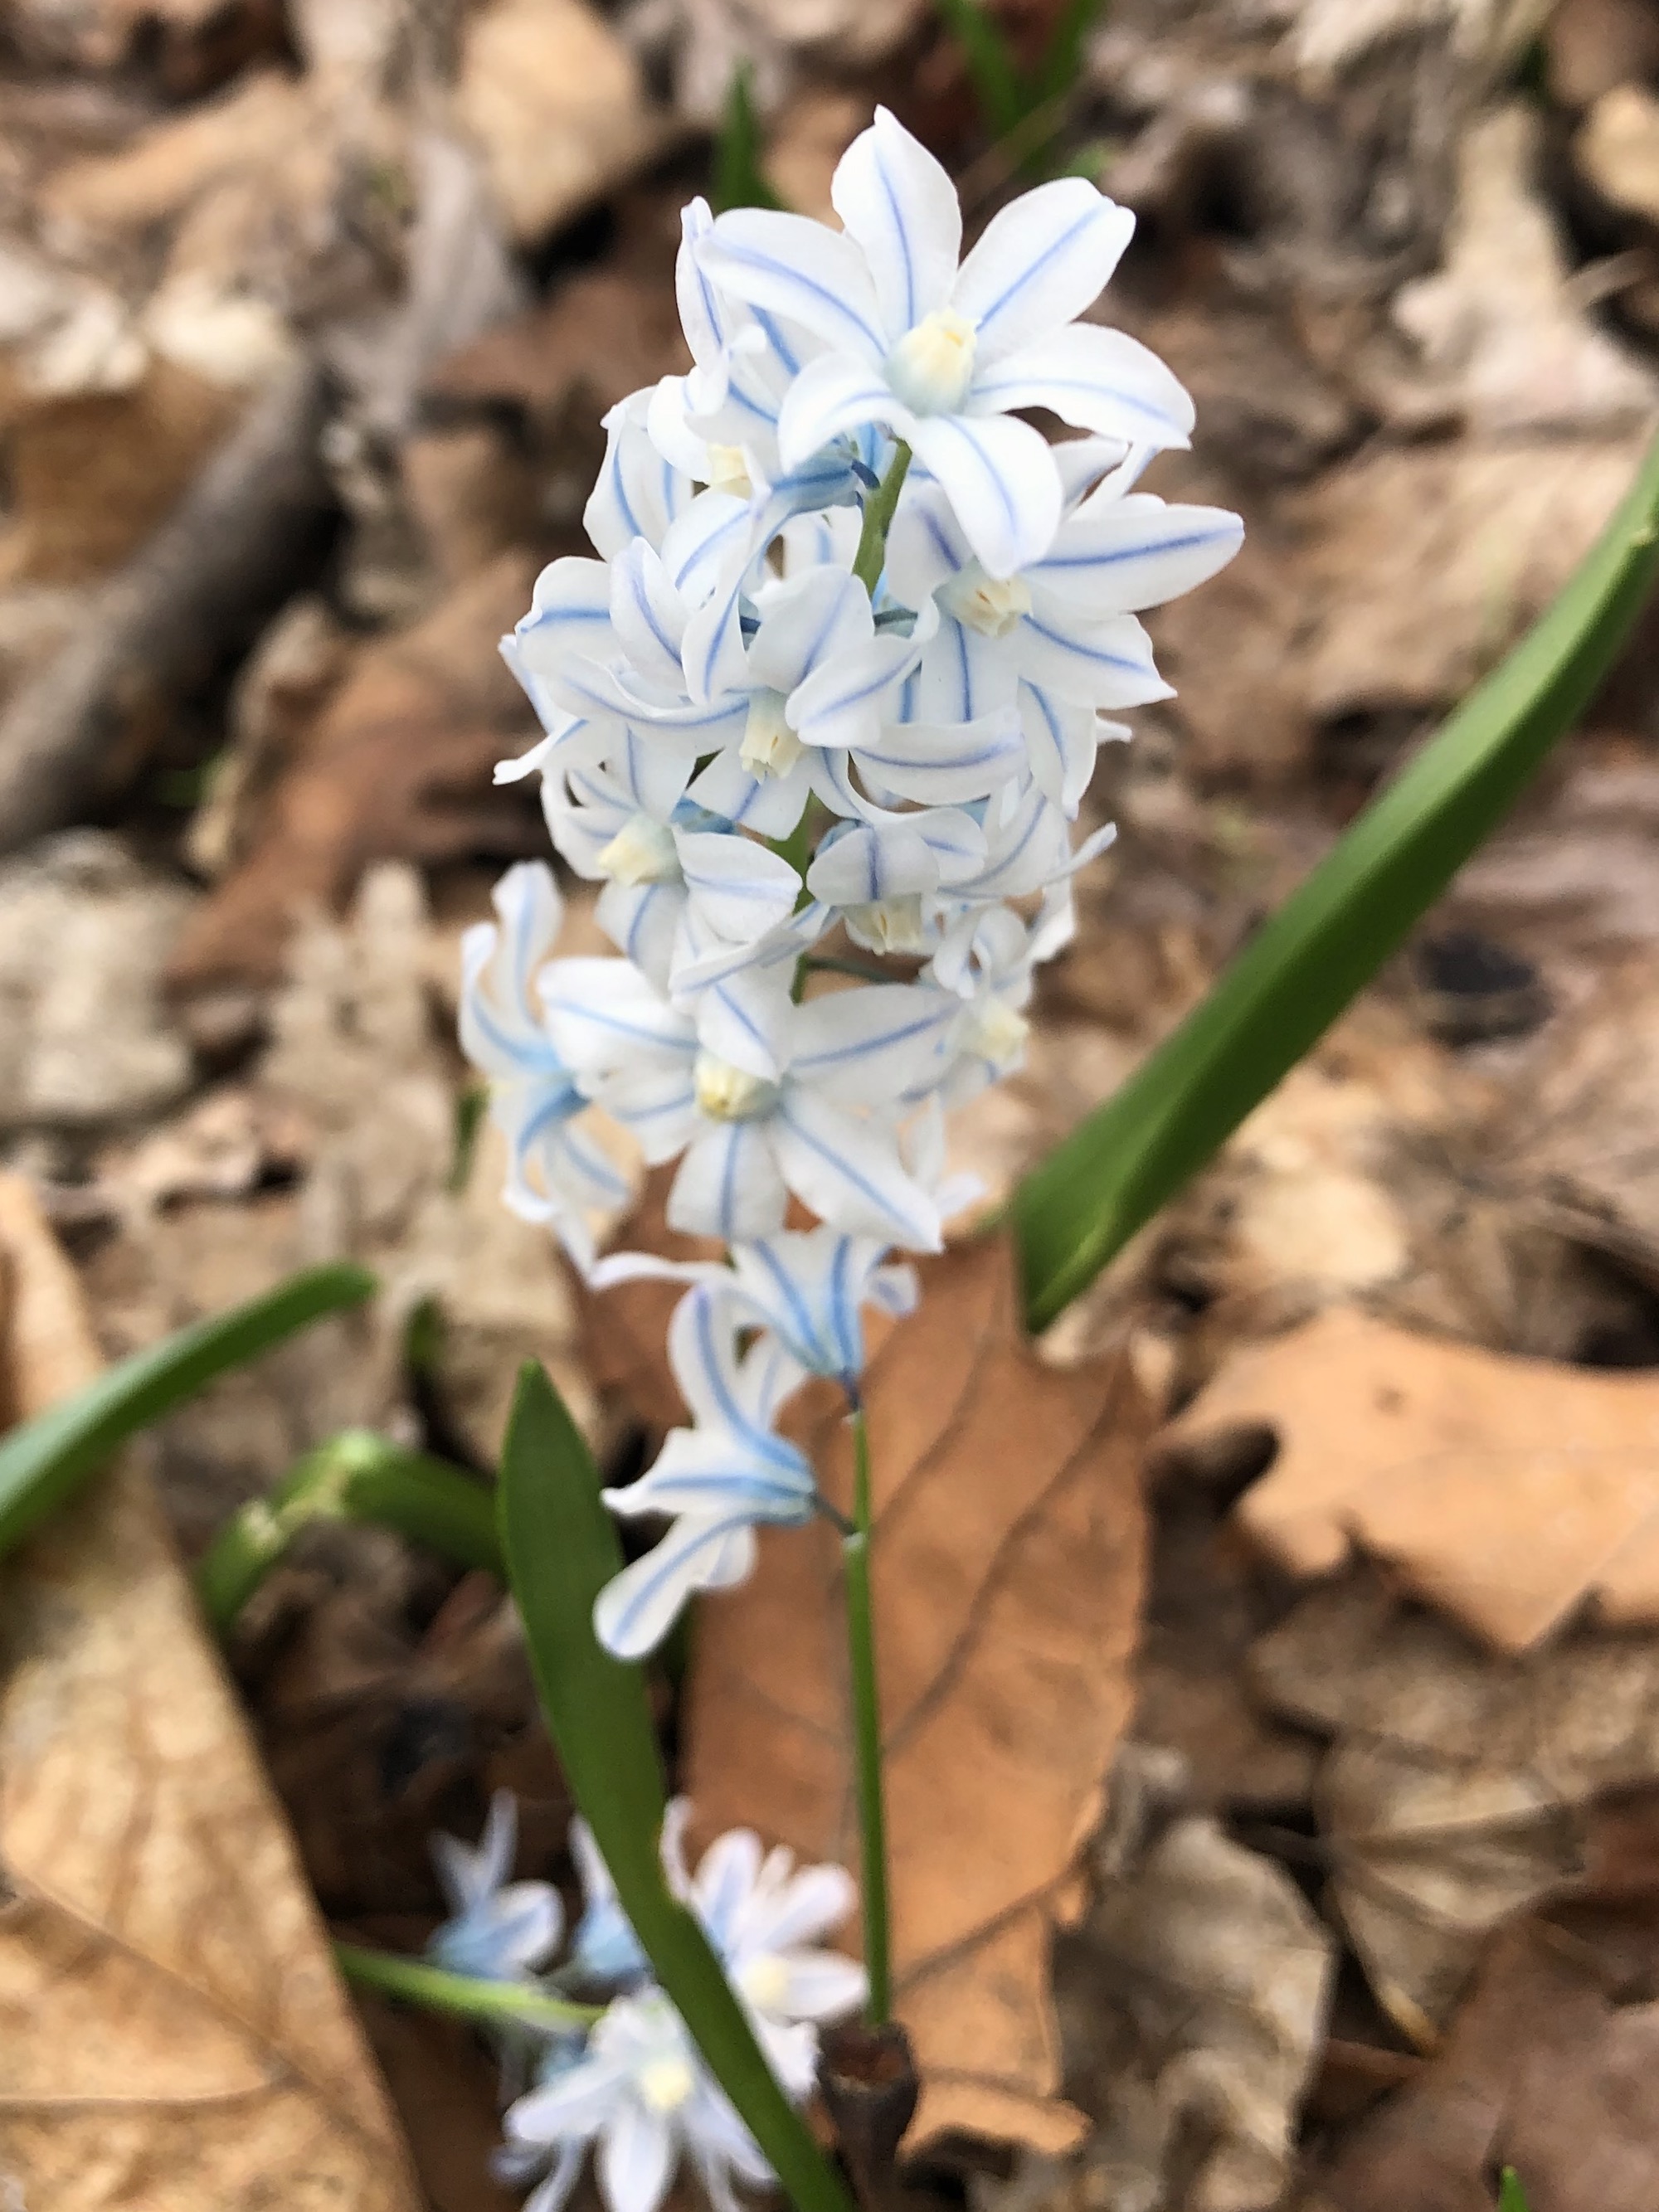 Striped Squill in woods near the Sycamore tree on Arbor Drive in Madison, Wisconsin on April 6, 2021.